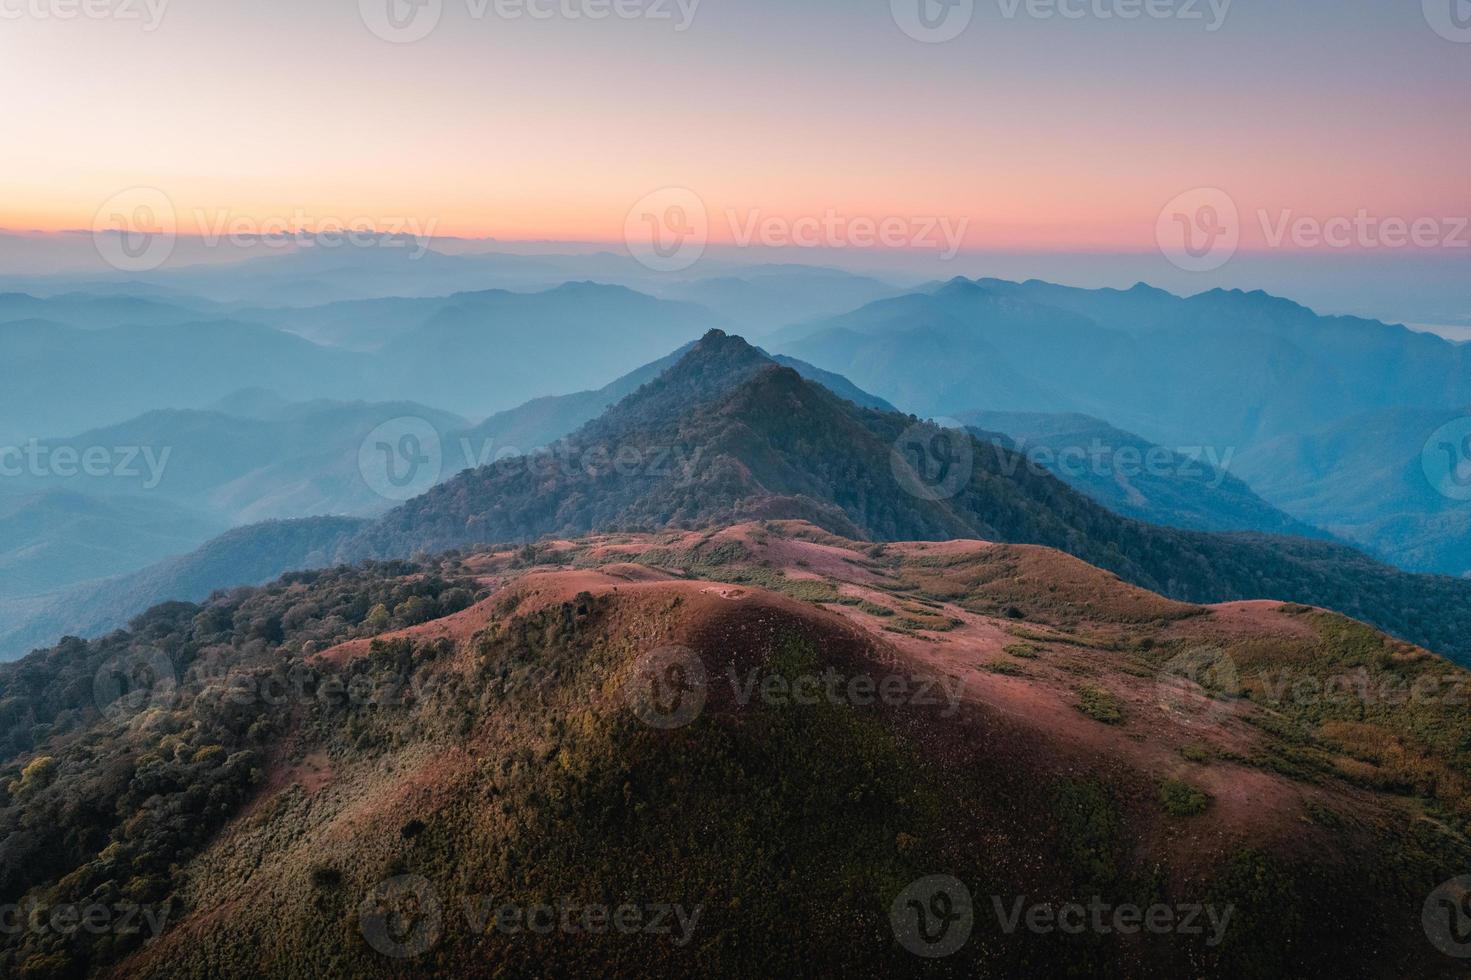 early morning mountain from above before sunrise photo